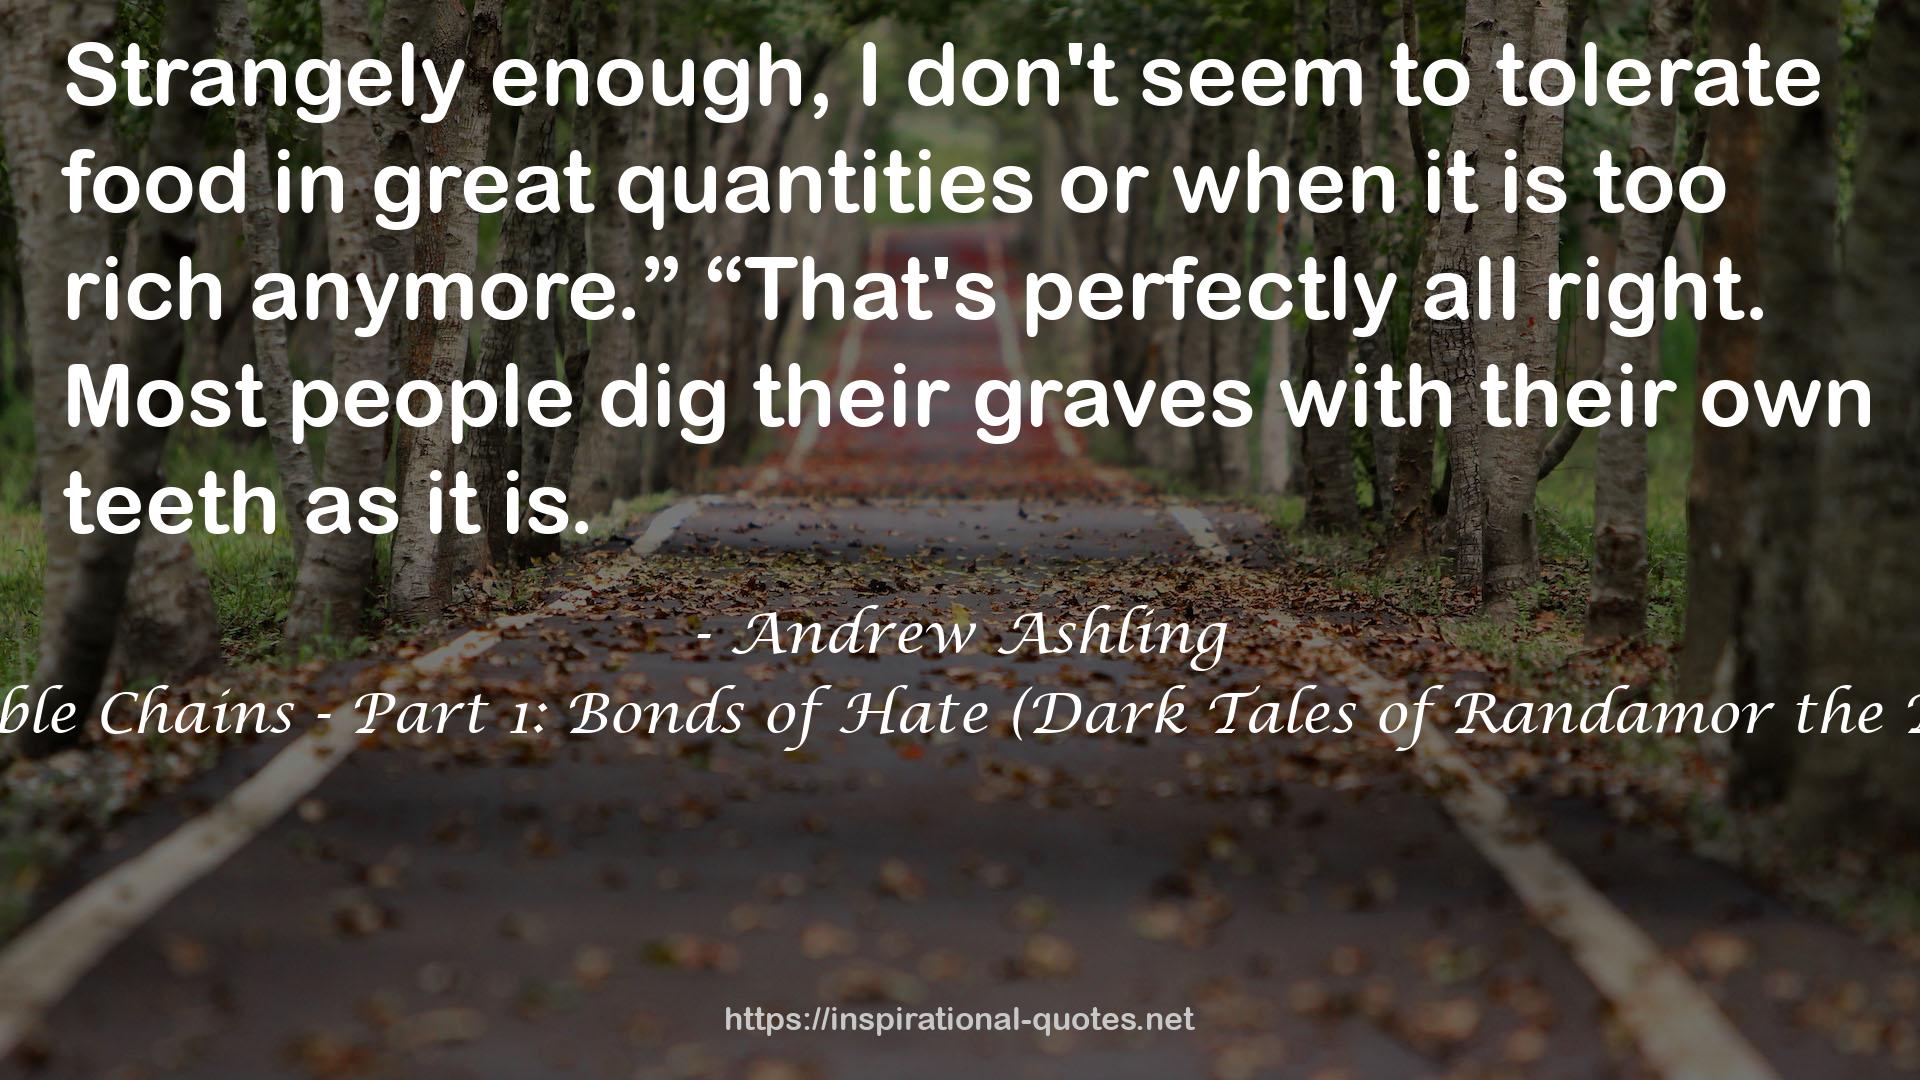 The Invisible Chains - Part 1: Bonds of Hate (Dark Tales of Randamor the Recluse #1) QUOTES